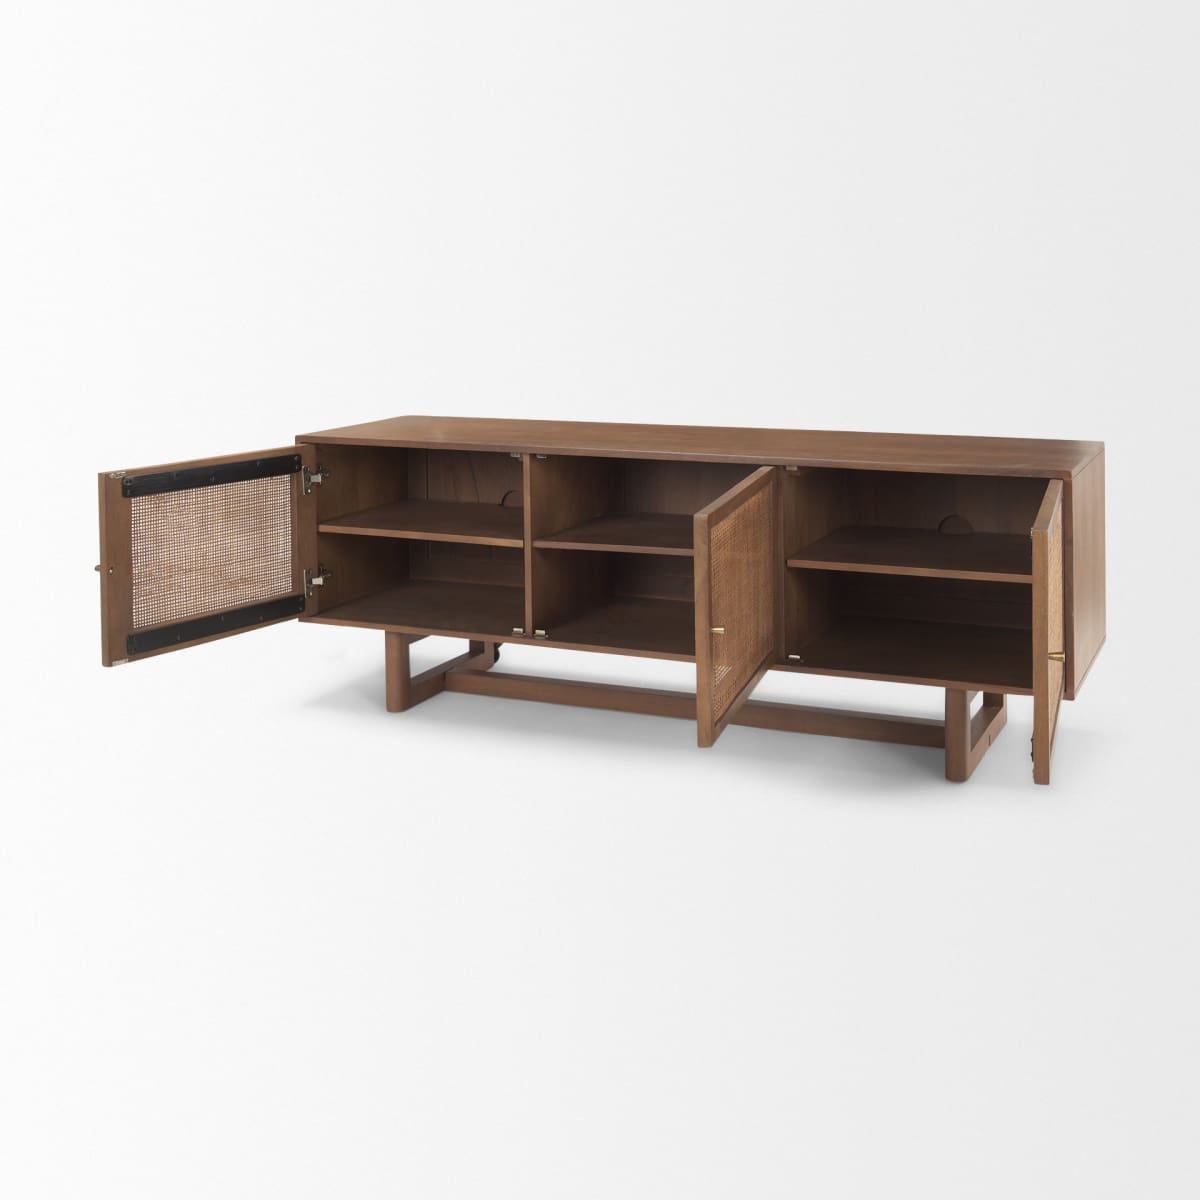 Grier Media Console Medium Brown Wood | Cane Accent - media-console